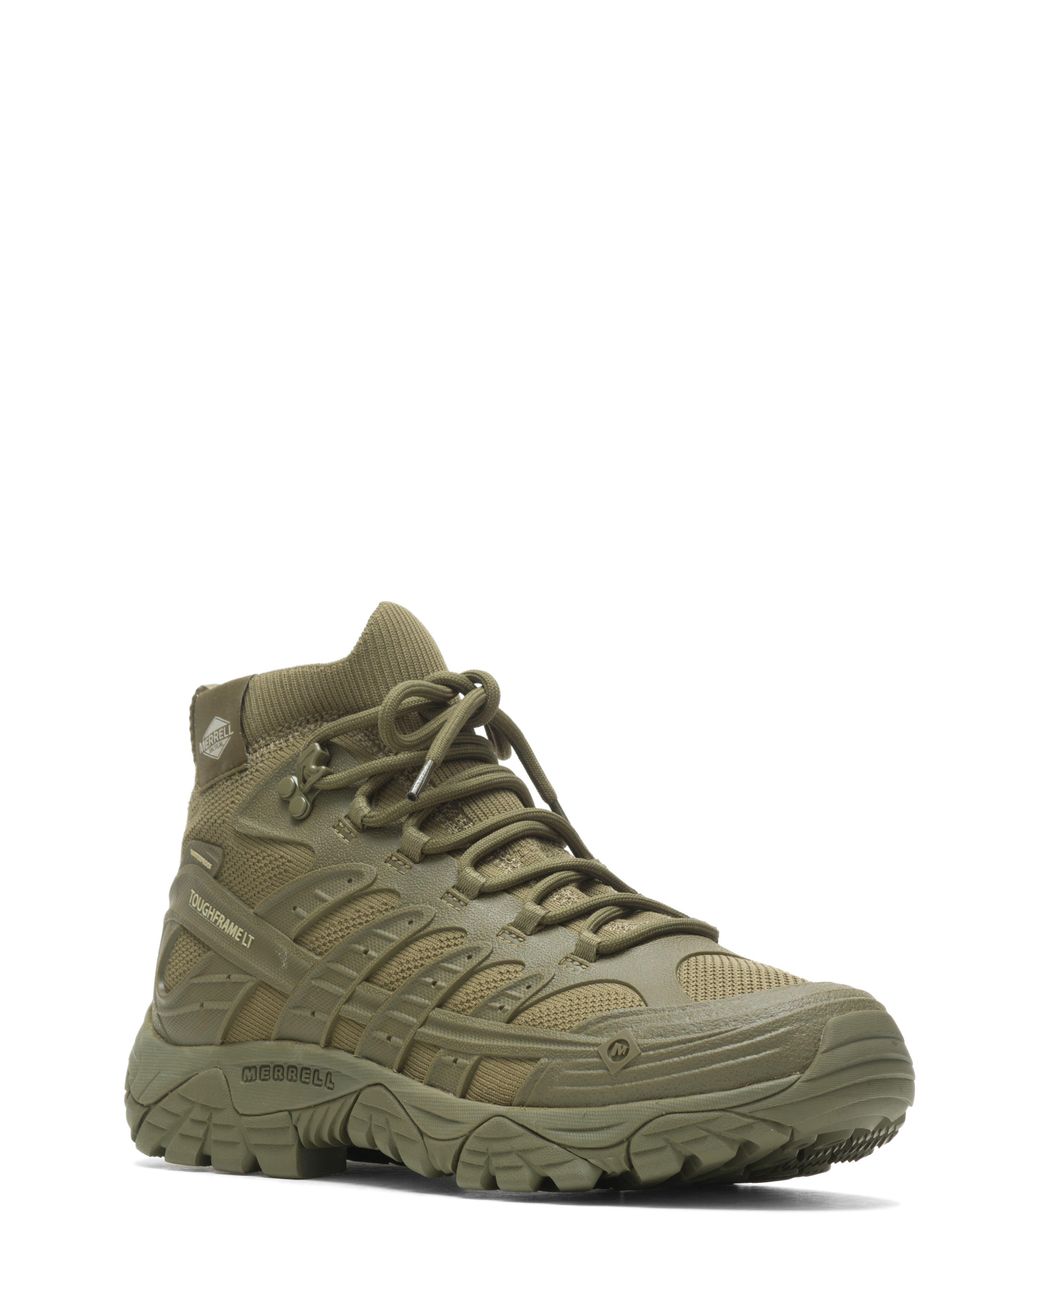 Merrell Moab Velocity Tactical Mid Waterproof Lace-up Hiking Boot in ...